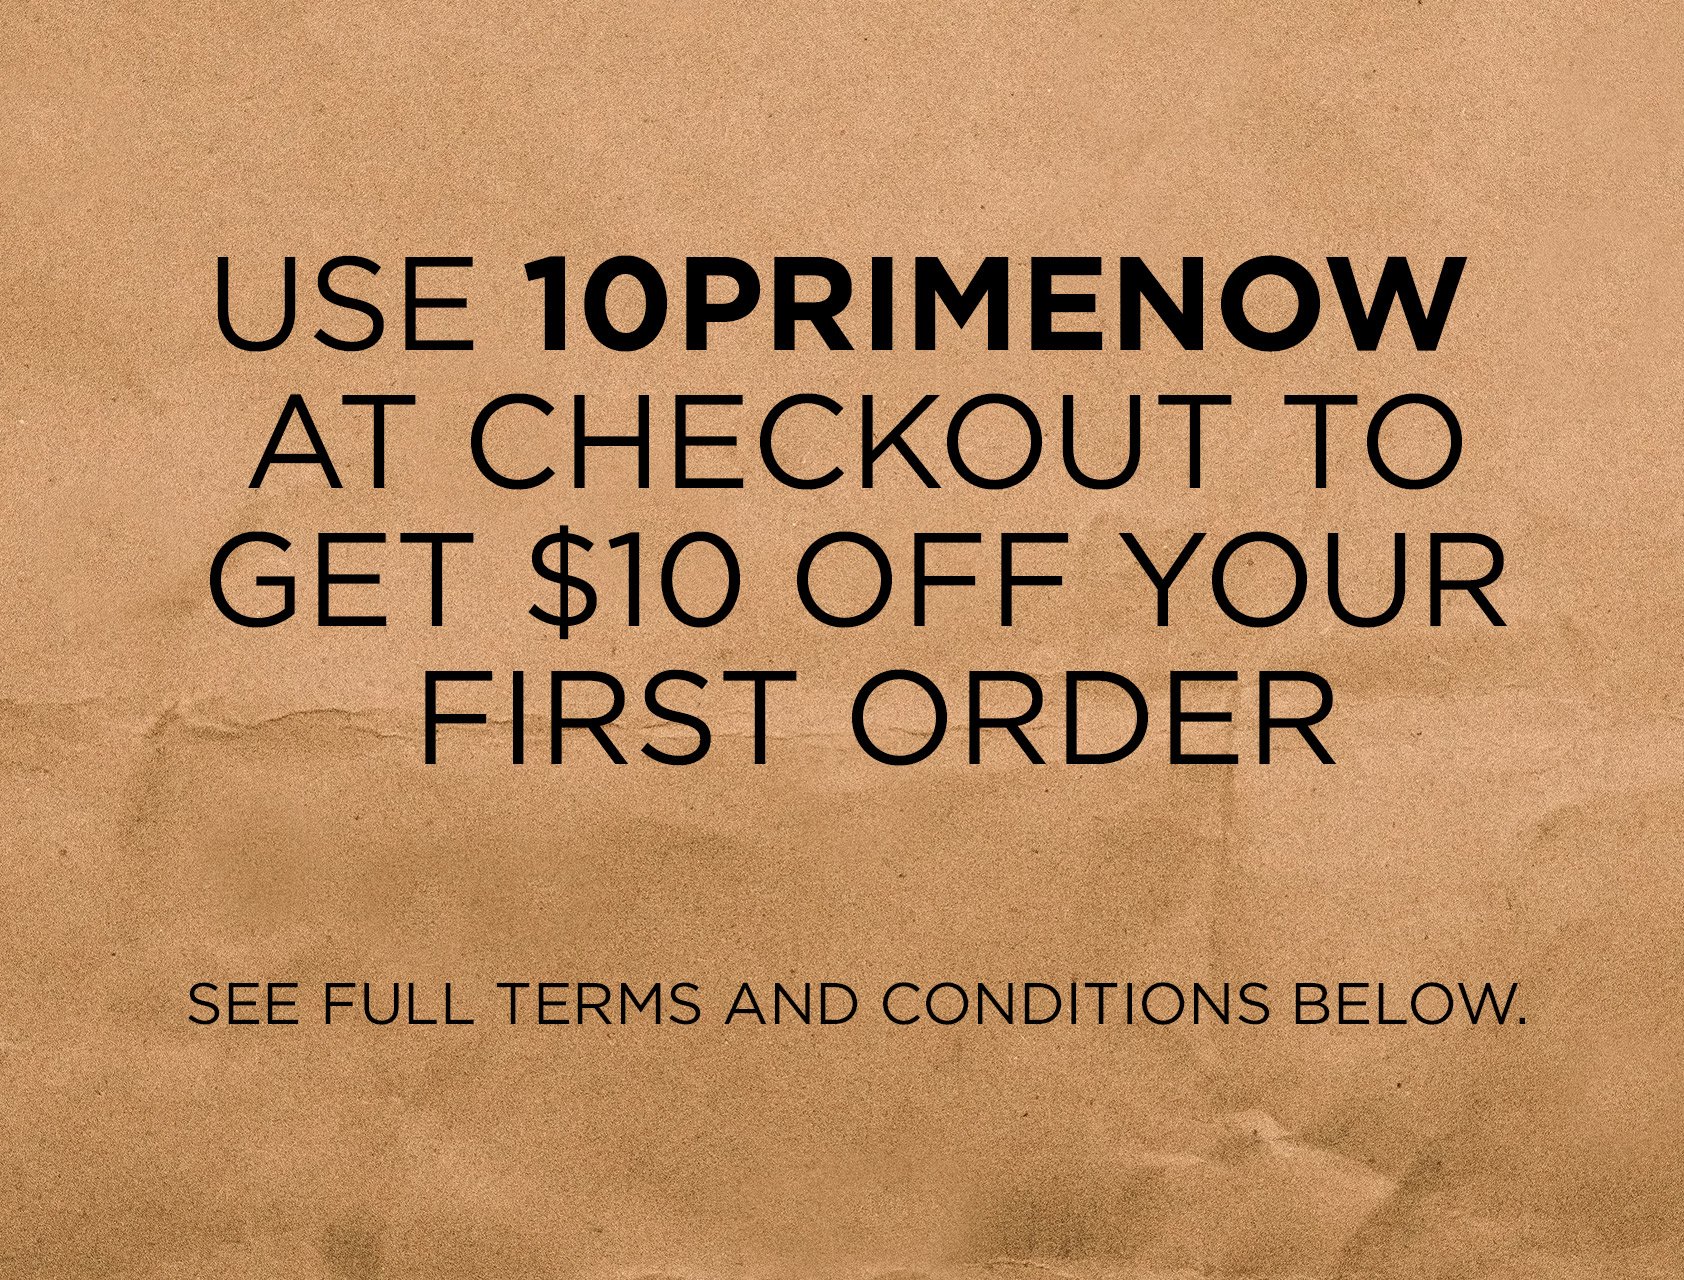 Extra 10 Off Promo Code 10primenow For First Time Amazon Prime